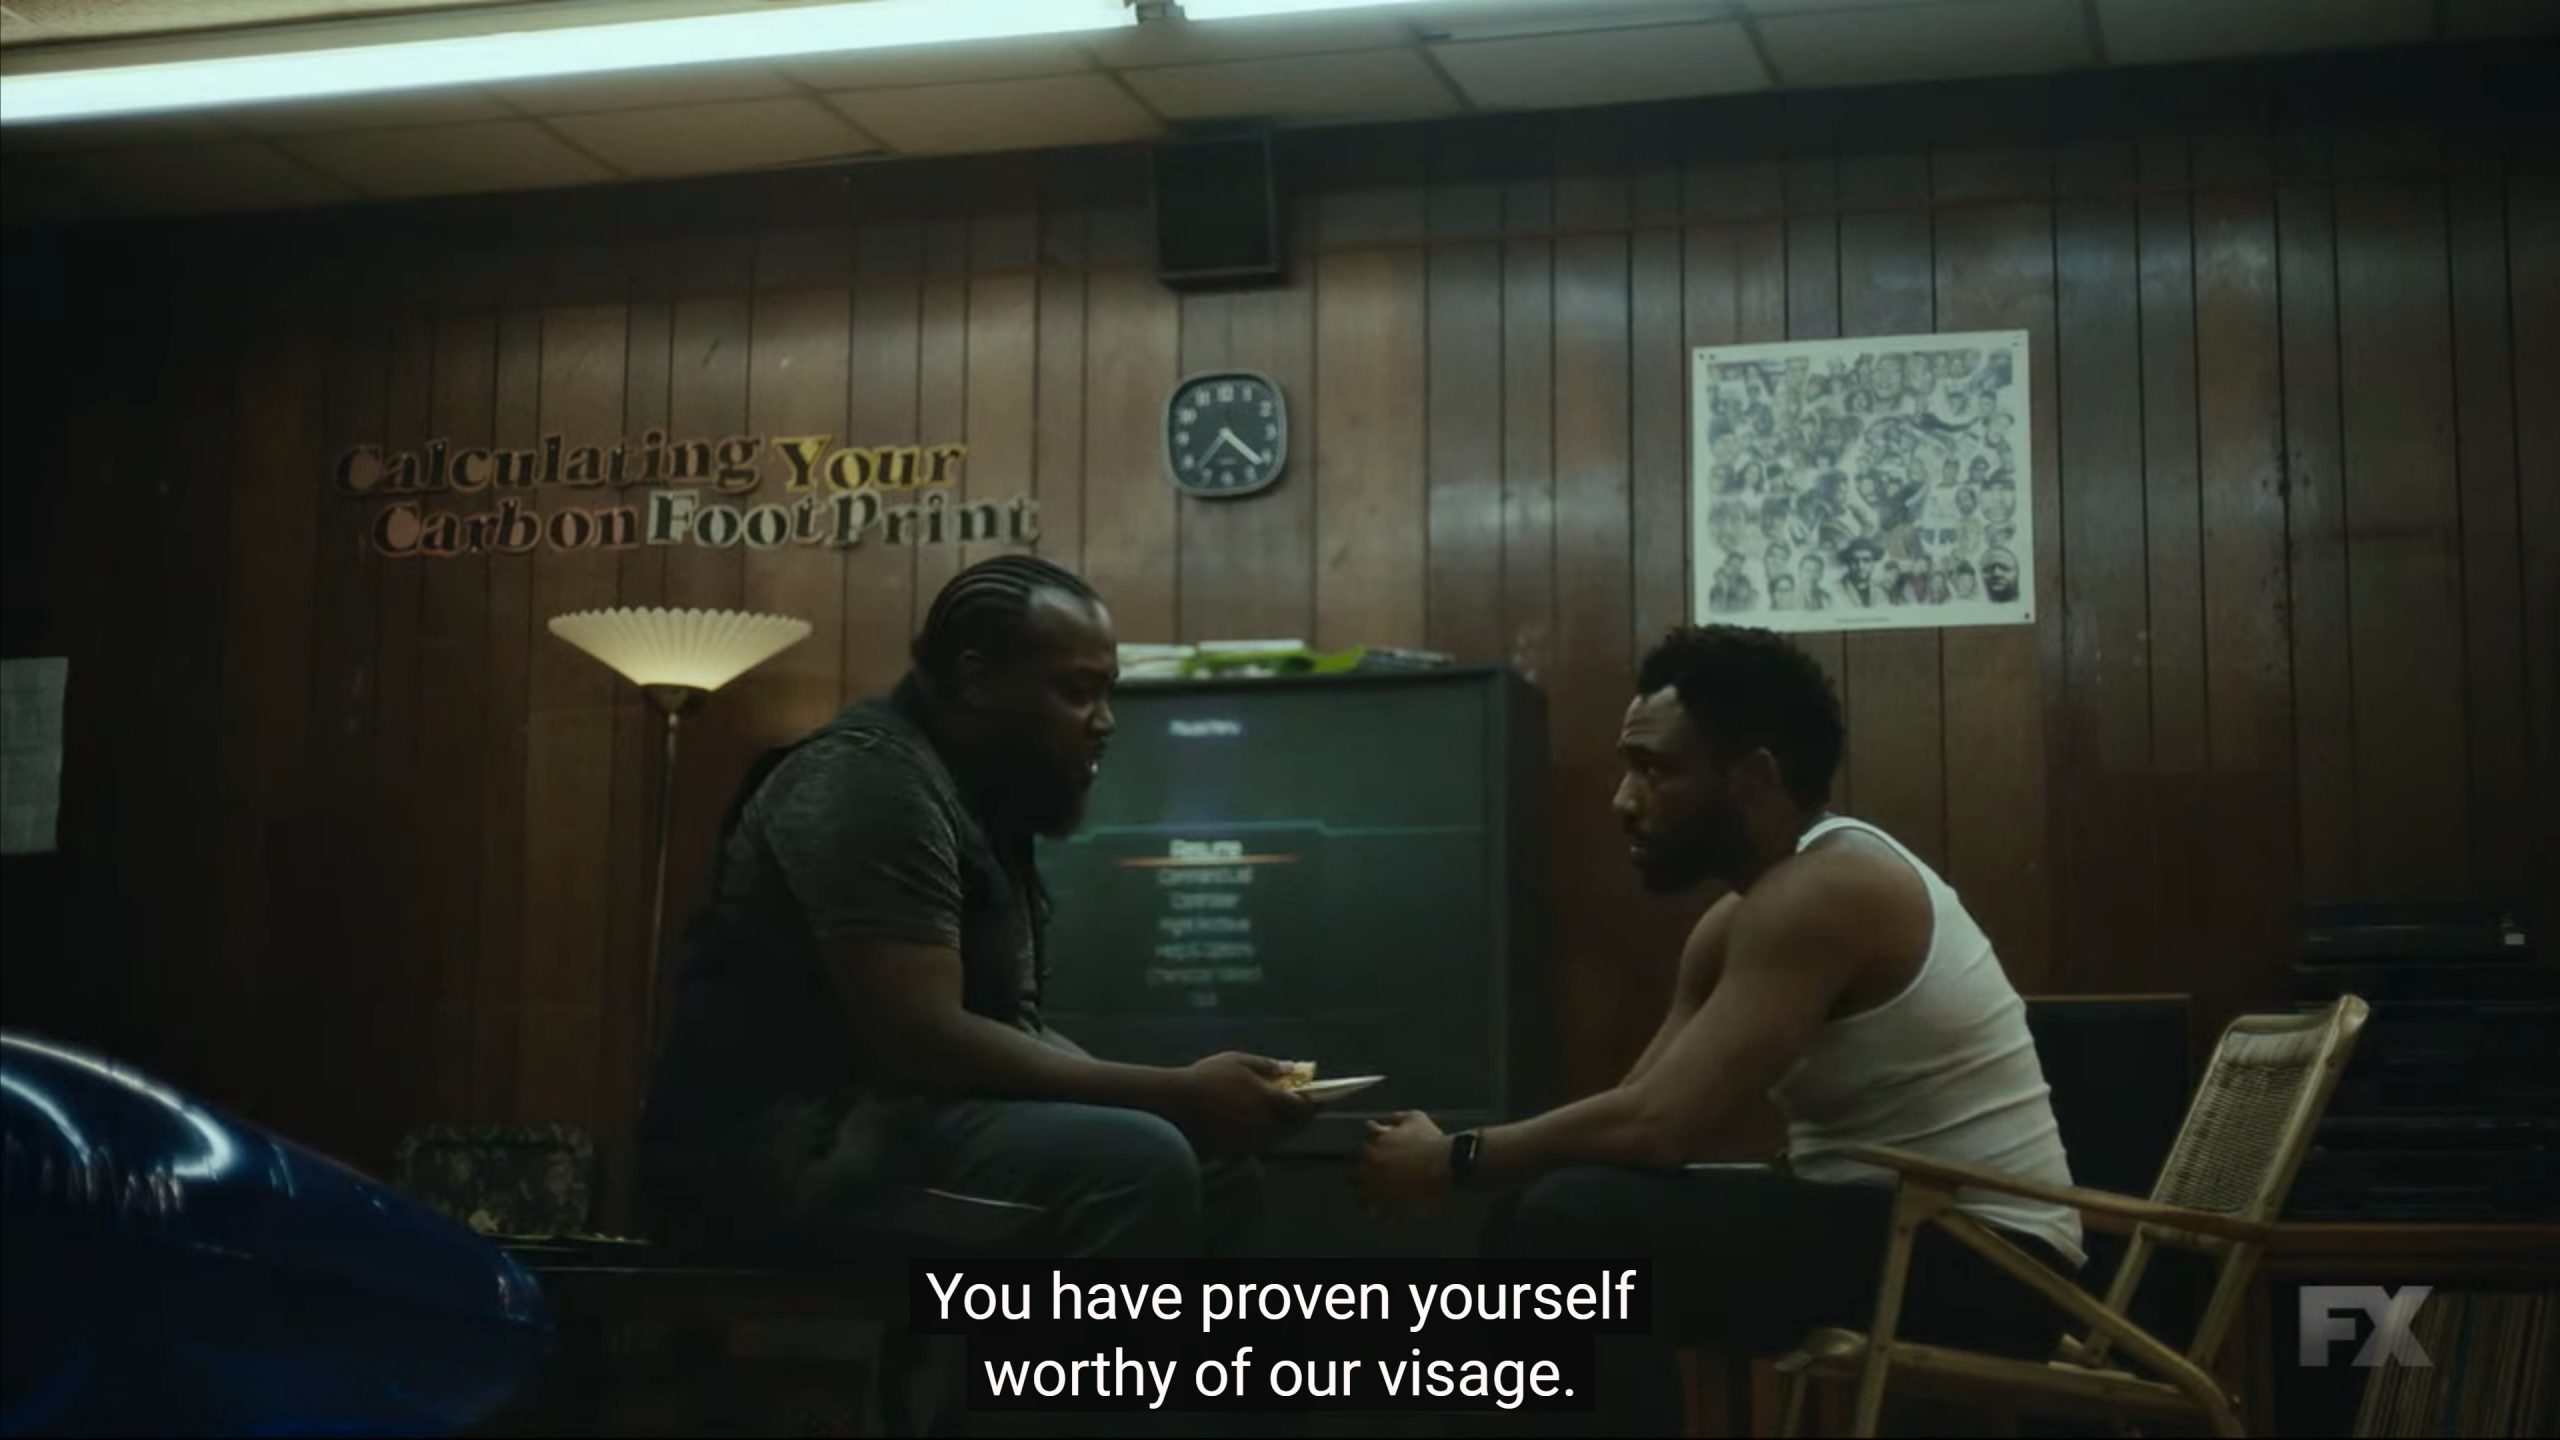 D'Angelo (Enoch King) and Earn talking about what it means to be D'Angelo